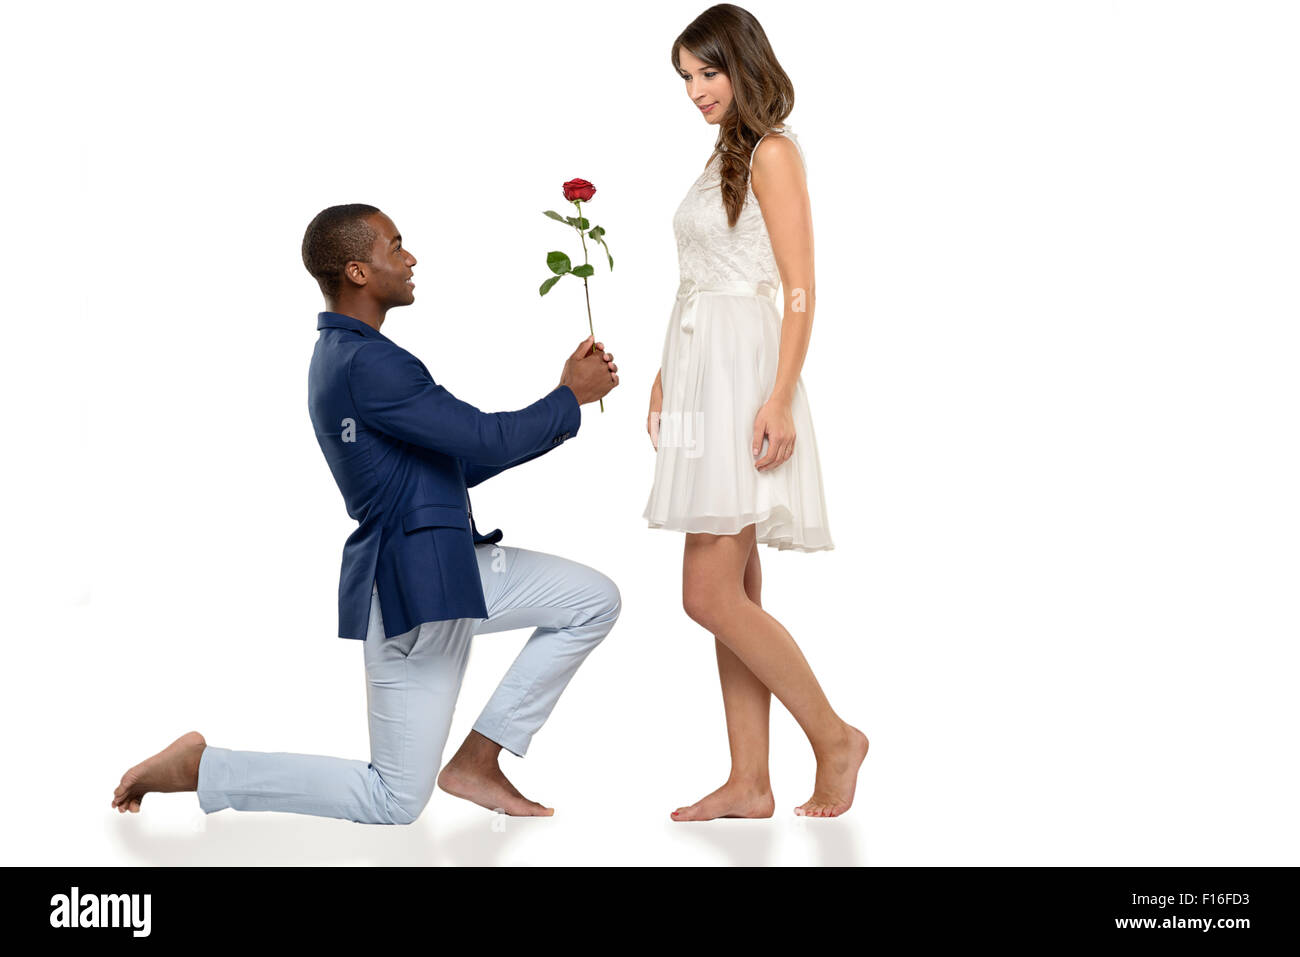 Romantic hipster barefoot young man kneeling on the floor proposing to his sweetheart declaring his undying love in a tender sce Stock Photo